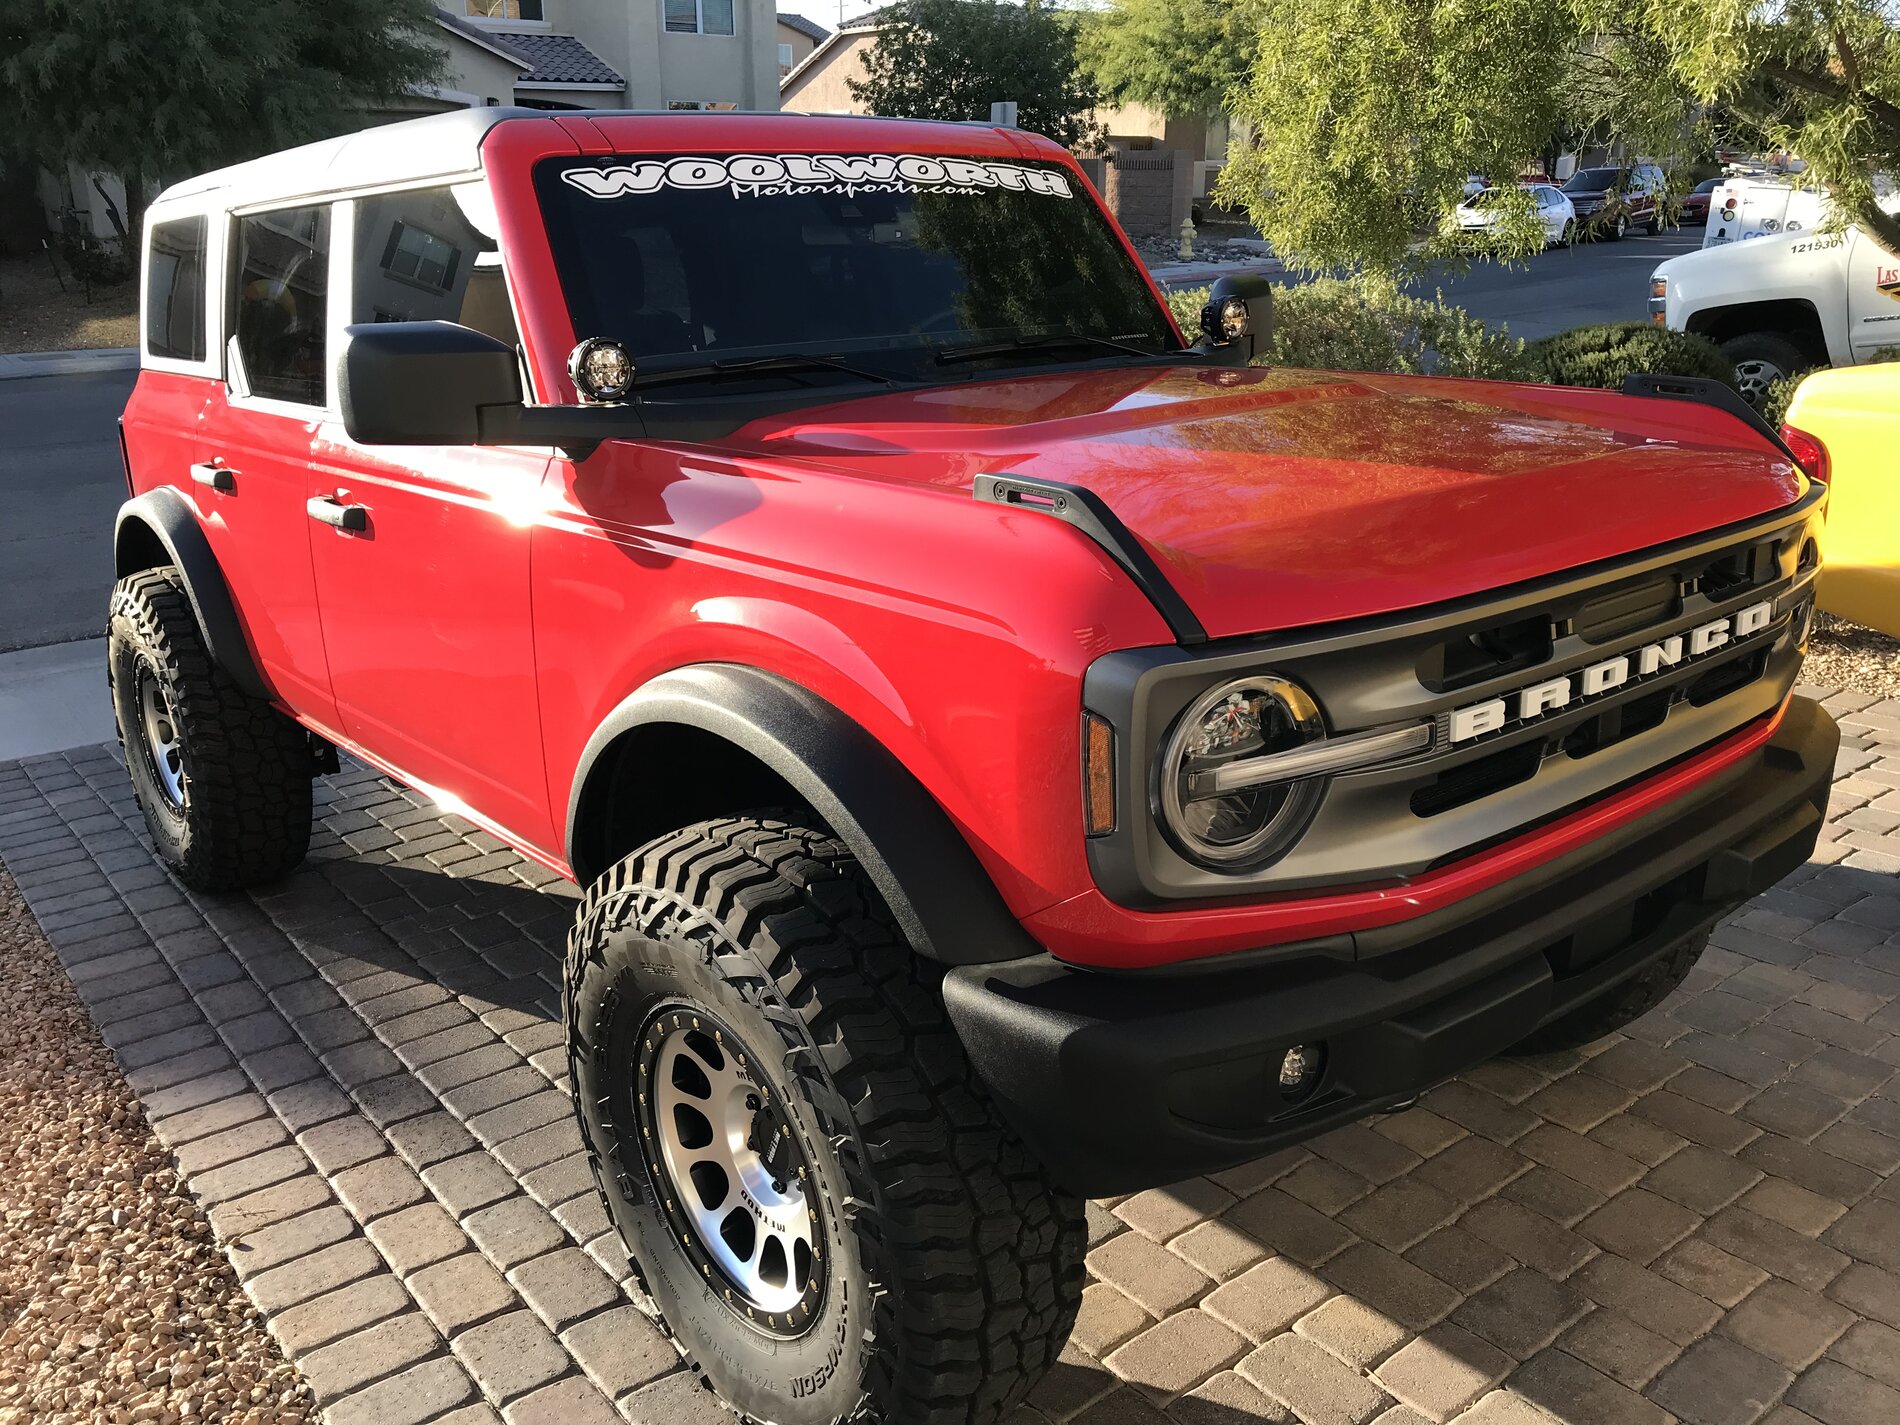 Ford Bronco Race Red on 37’s and FordBroncoLifts level lift kit - 3" front / 2" rear staggered lift 1634685490962